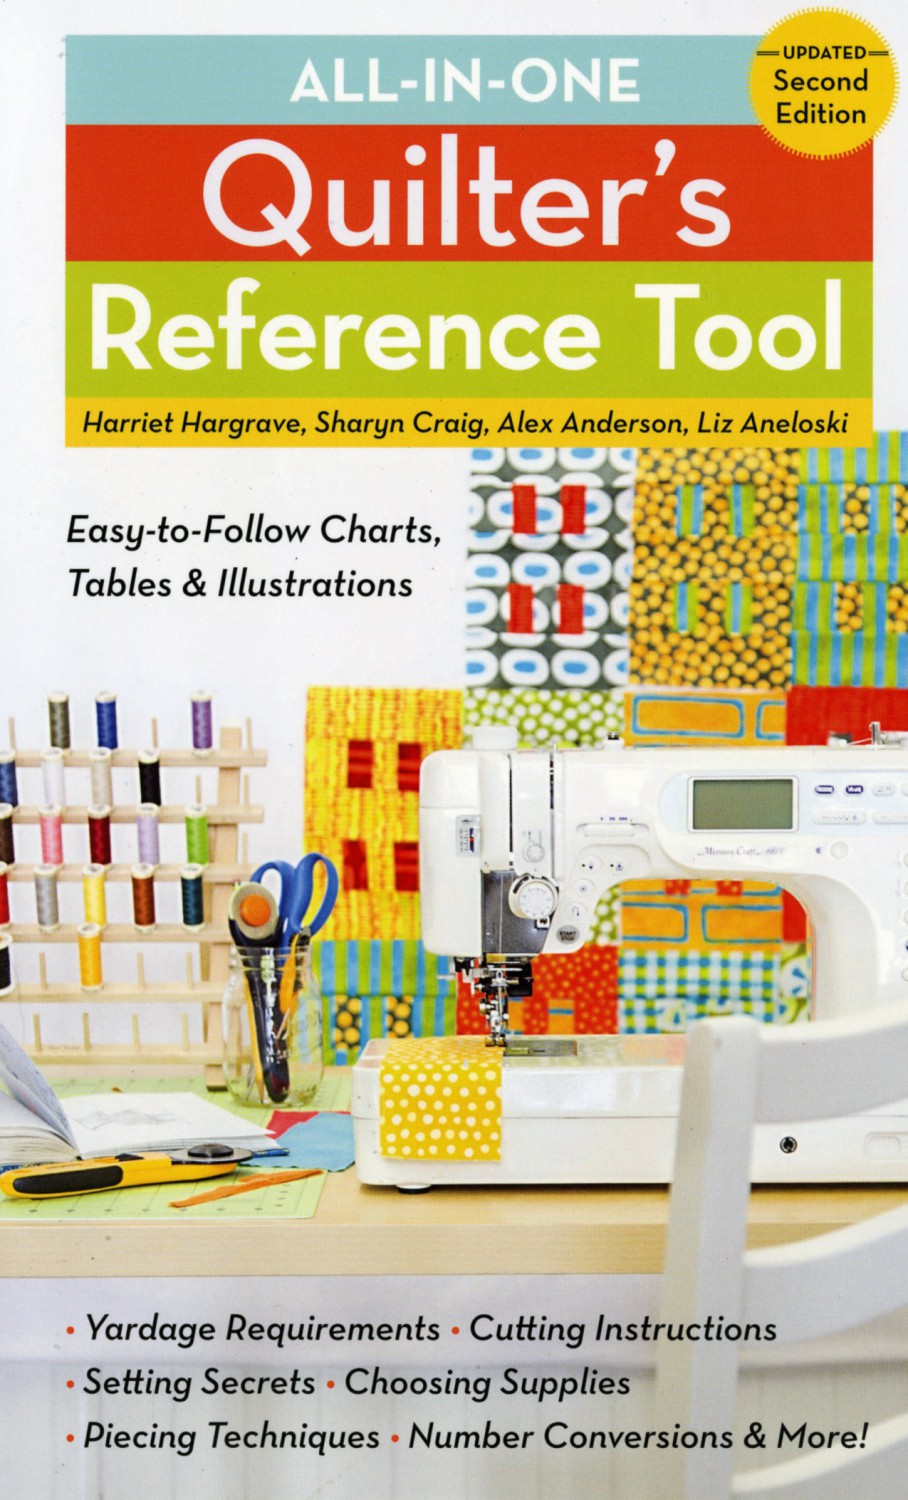 All-in-One Quilter's Reference Tool (updated) - Softcover (417282654248)